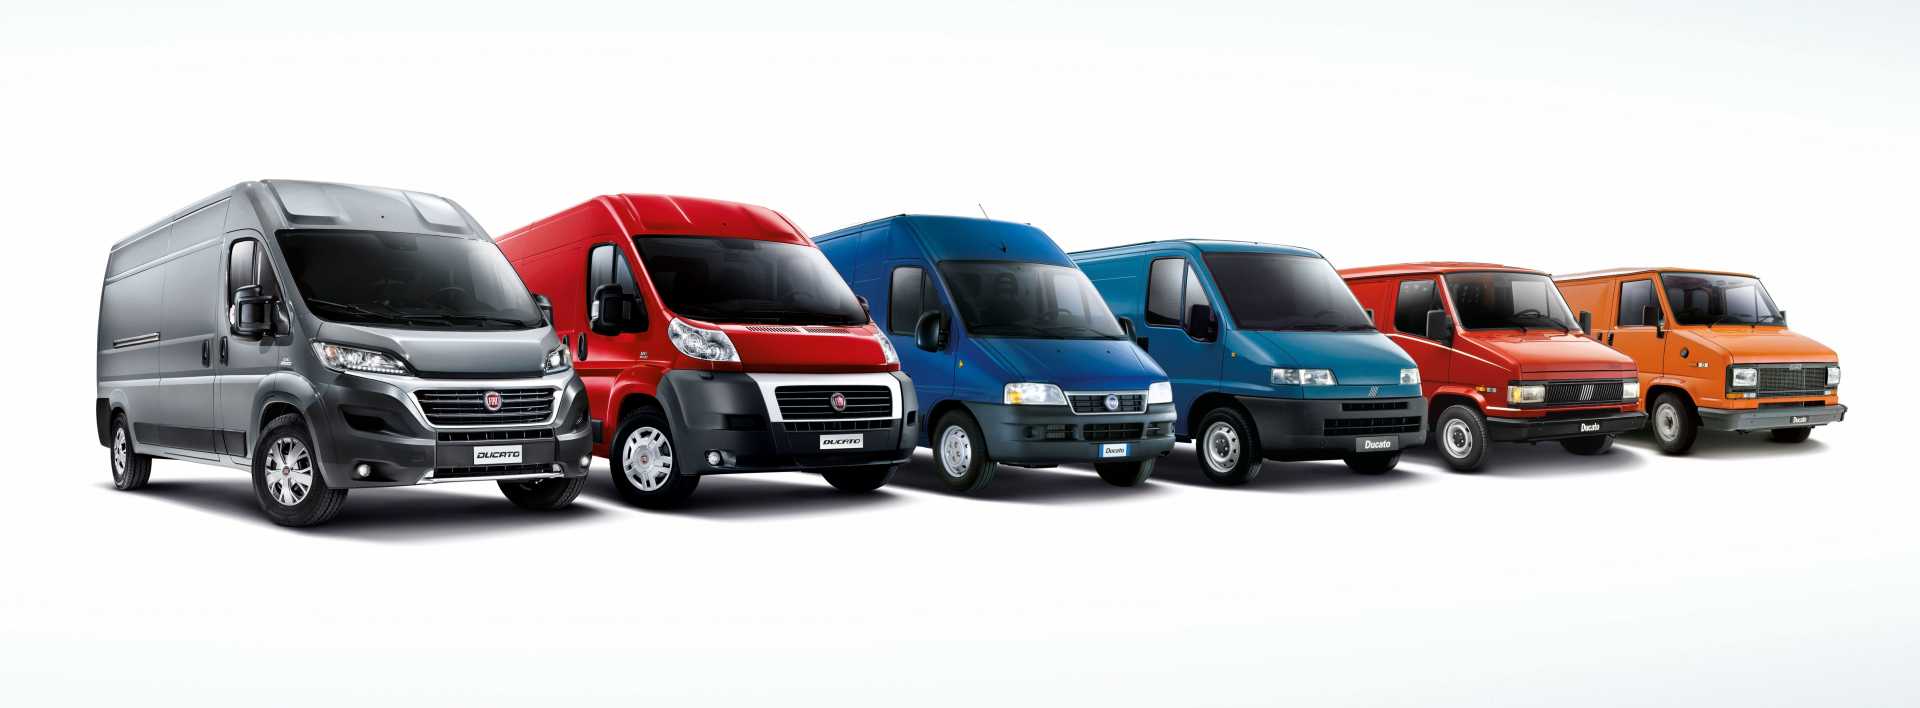 Fiat Ducato delivers 35 years reliable, cost effective service